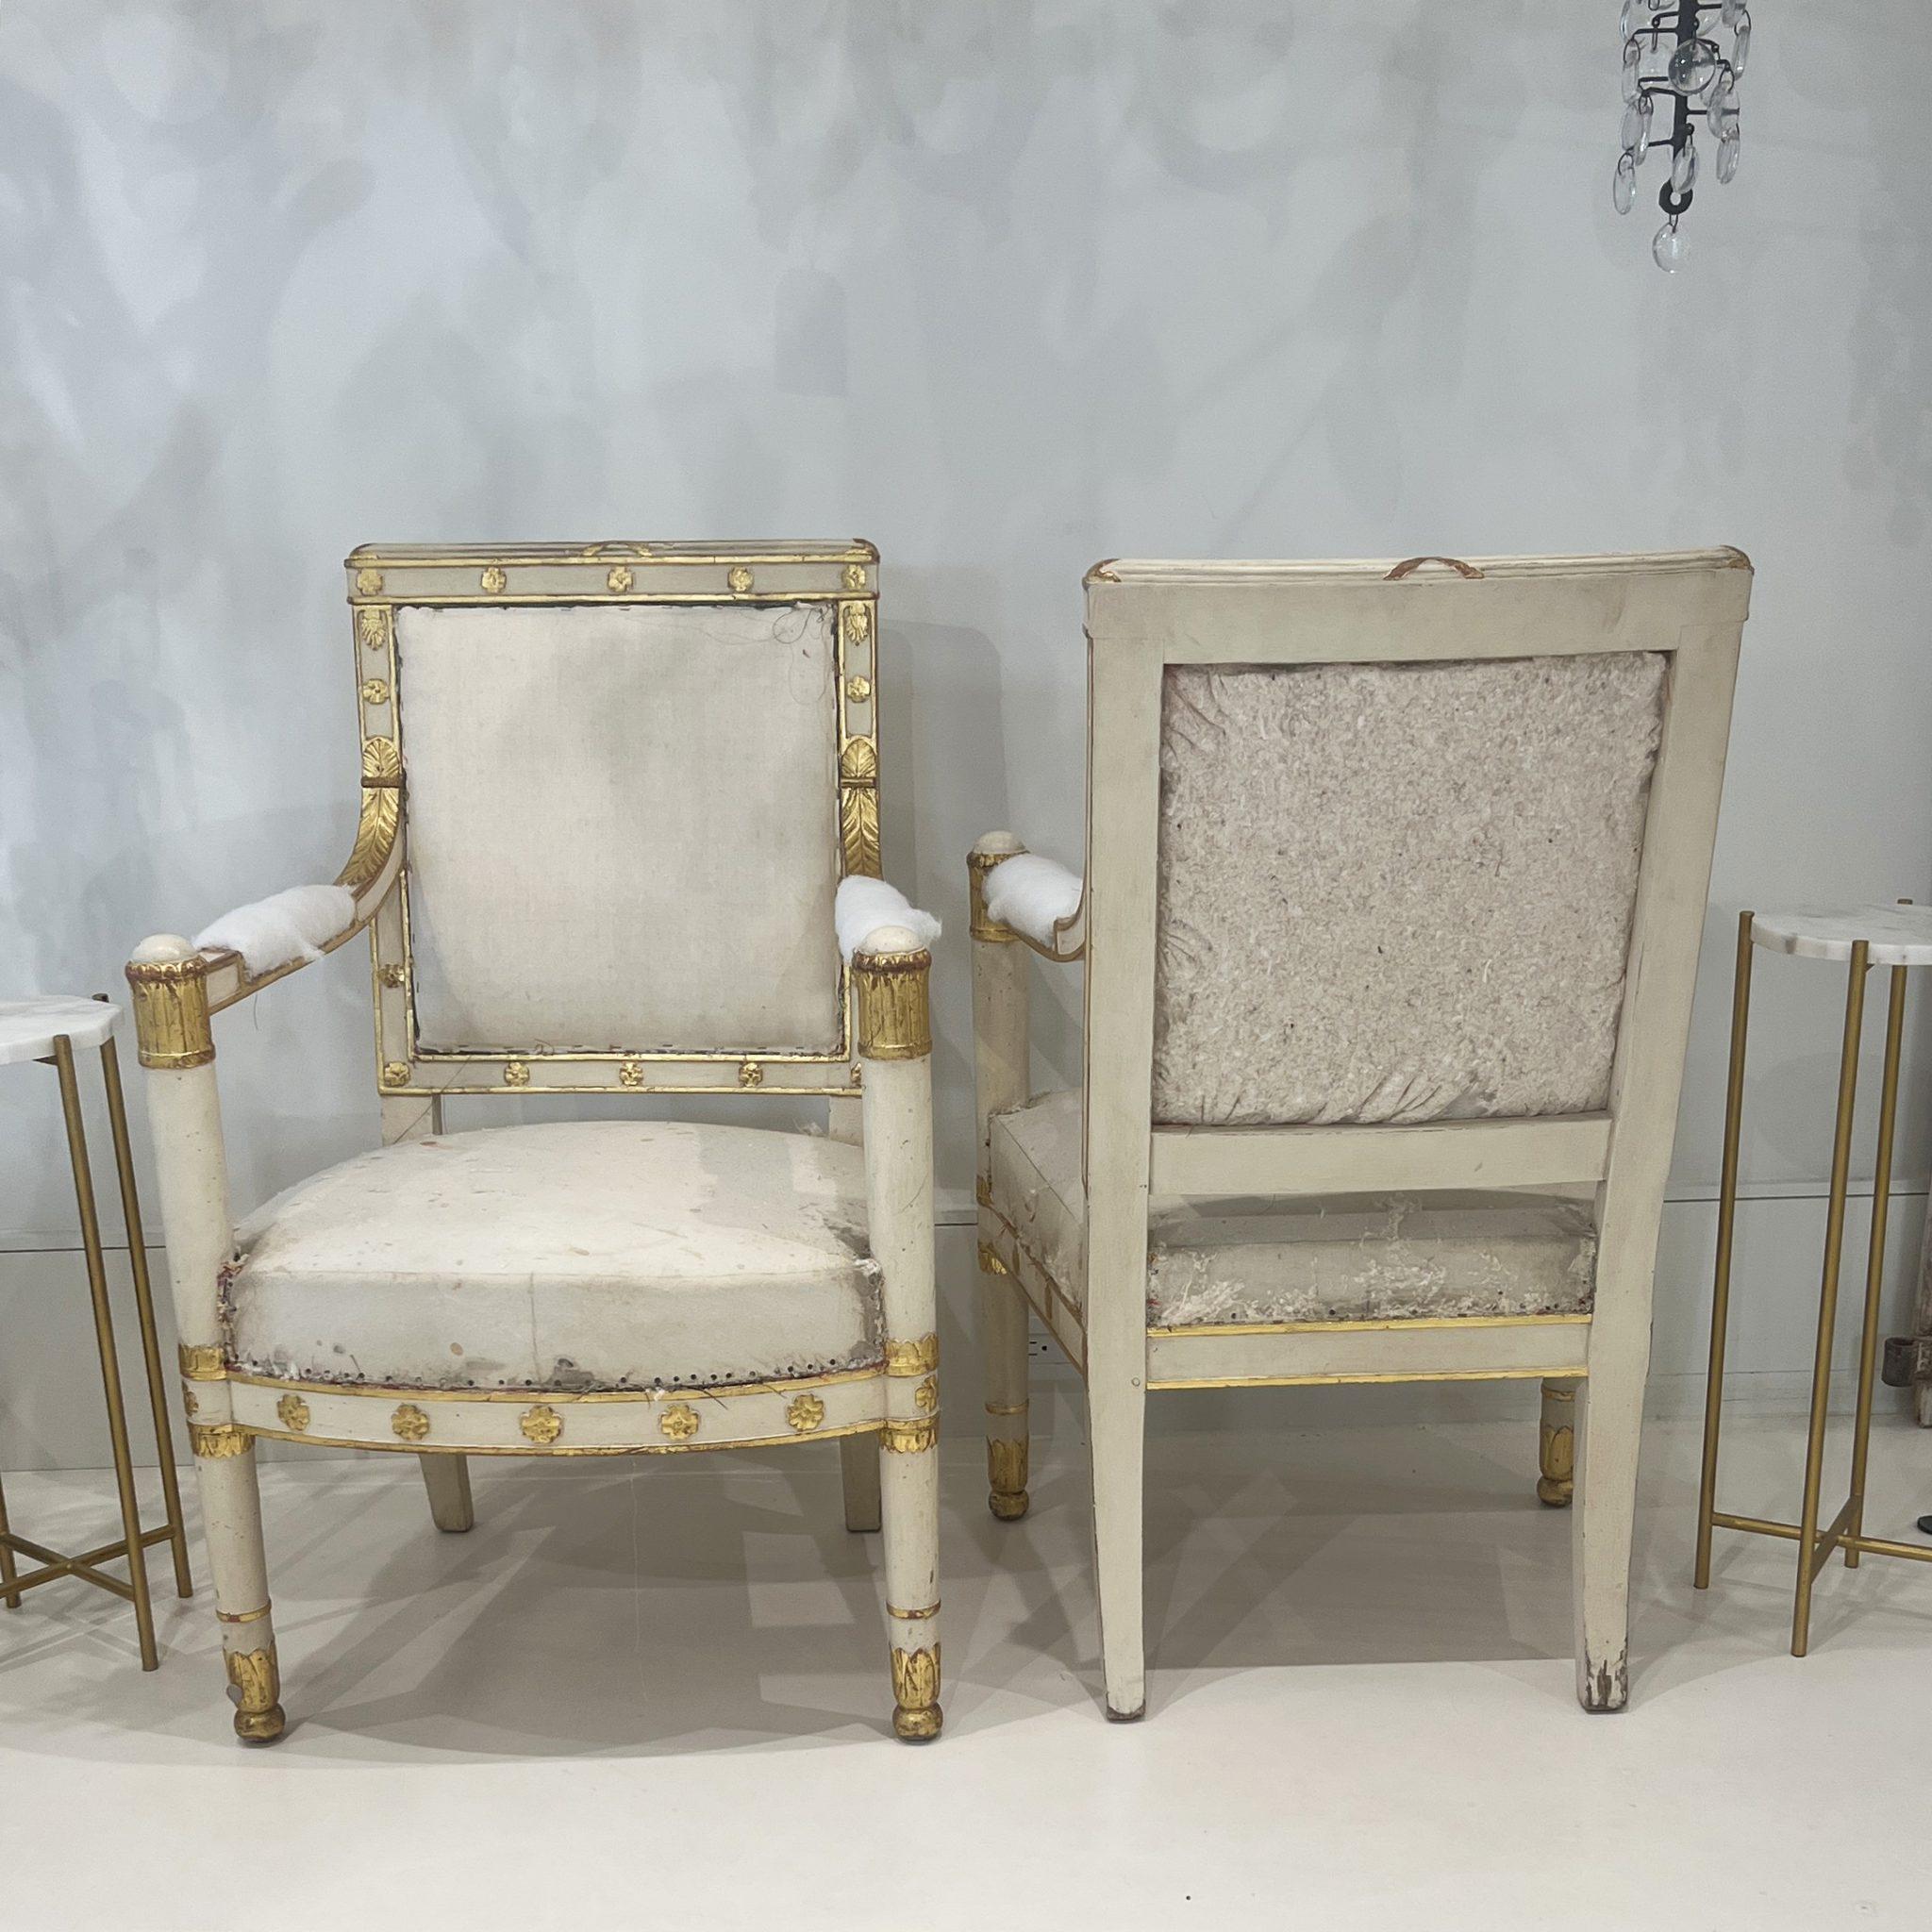 Matching pair of Empire armchairs attributed to Henri Jacob. Seats and backs are covered in muslin. Painted off white with gold detailing. Very stable construction.